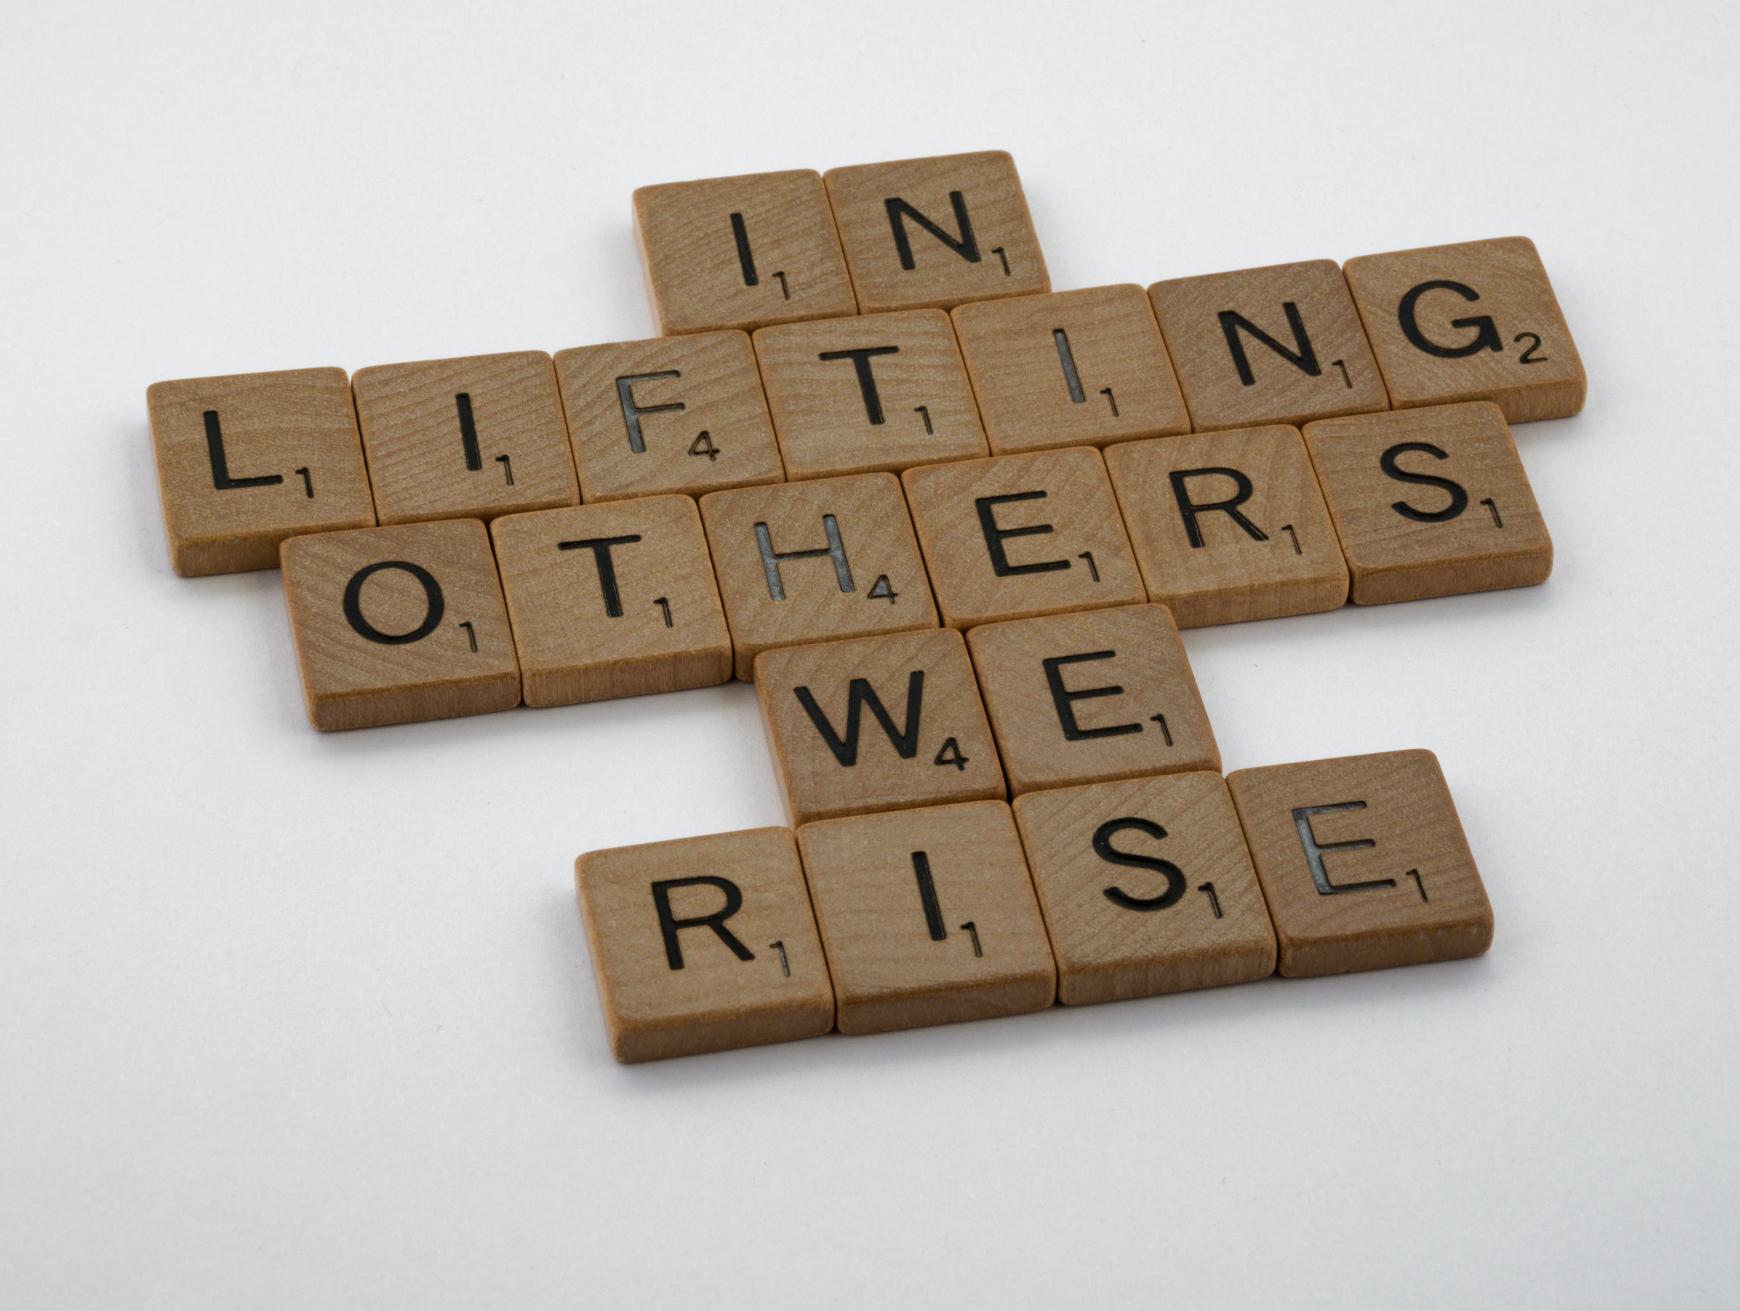 In lifting others